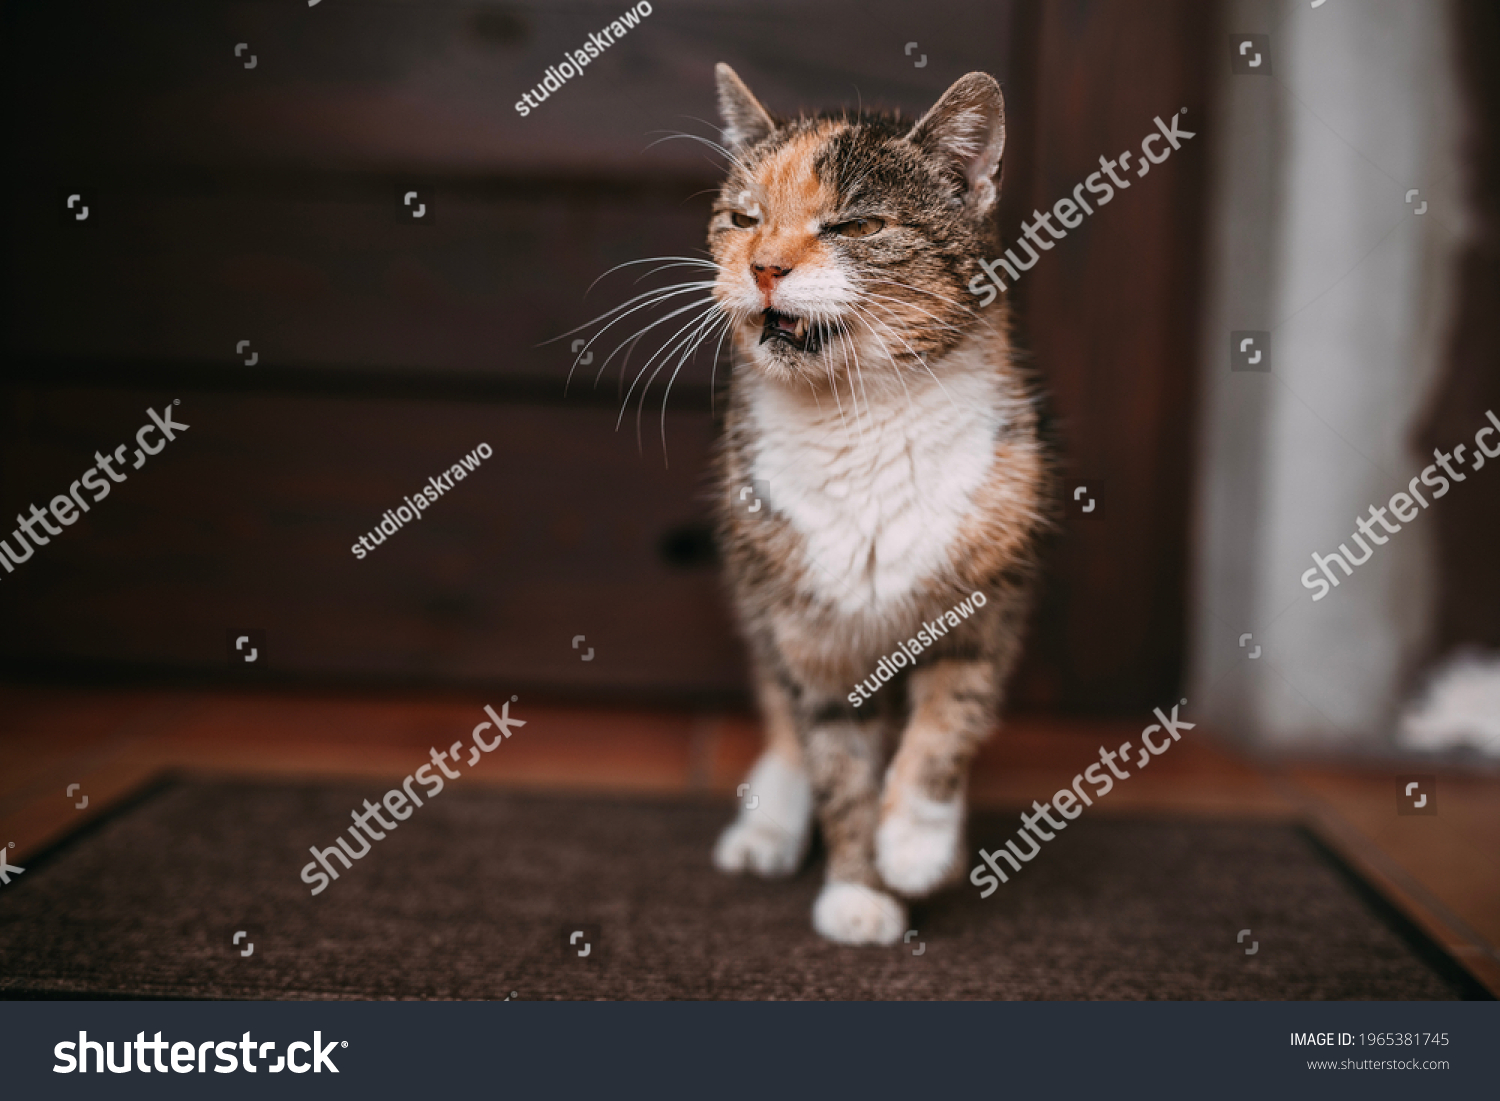 the cat meows in front of the door, the cat wants to enter the house #1965381745